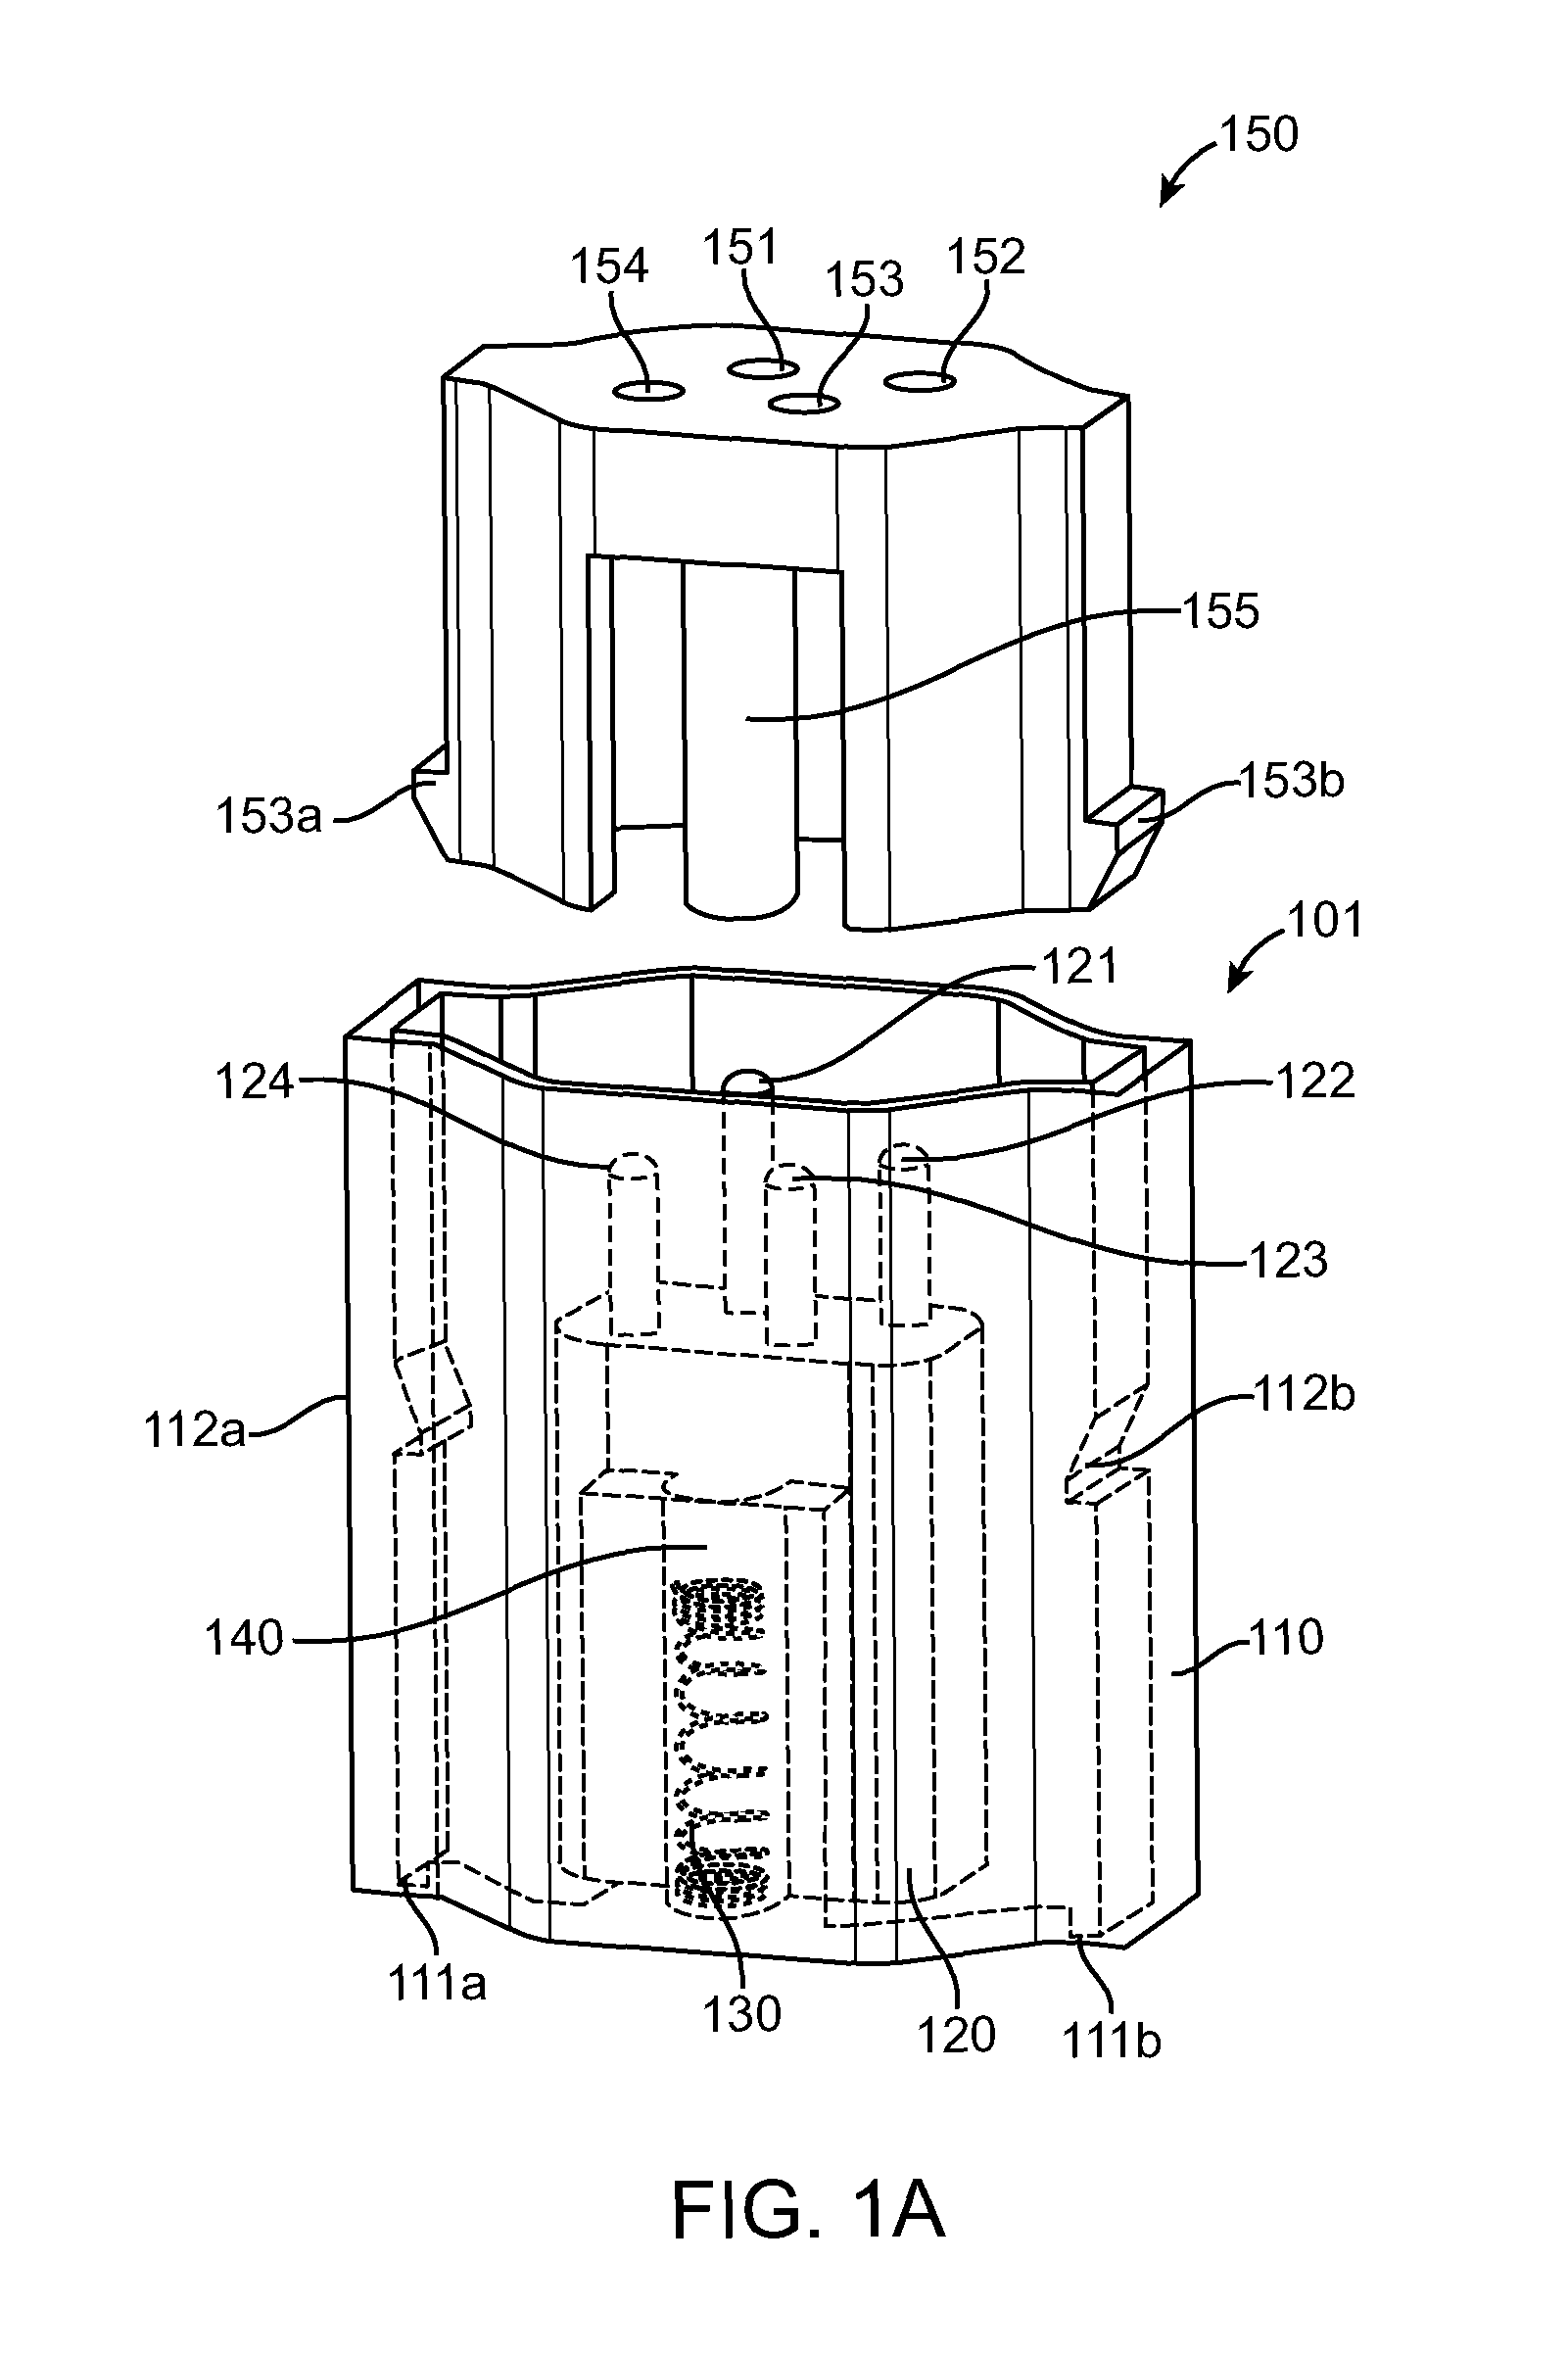 Self-cleaning electrical connection assembly